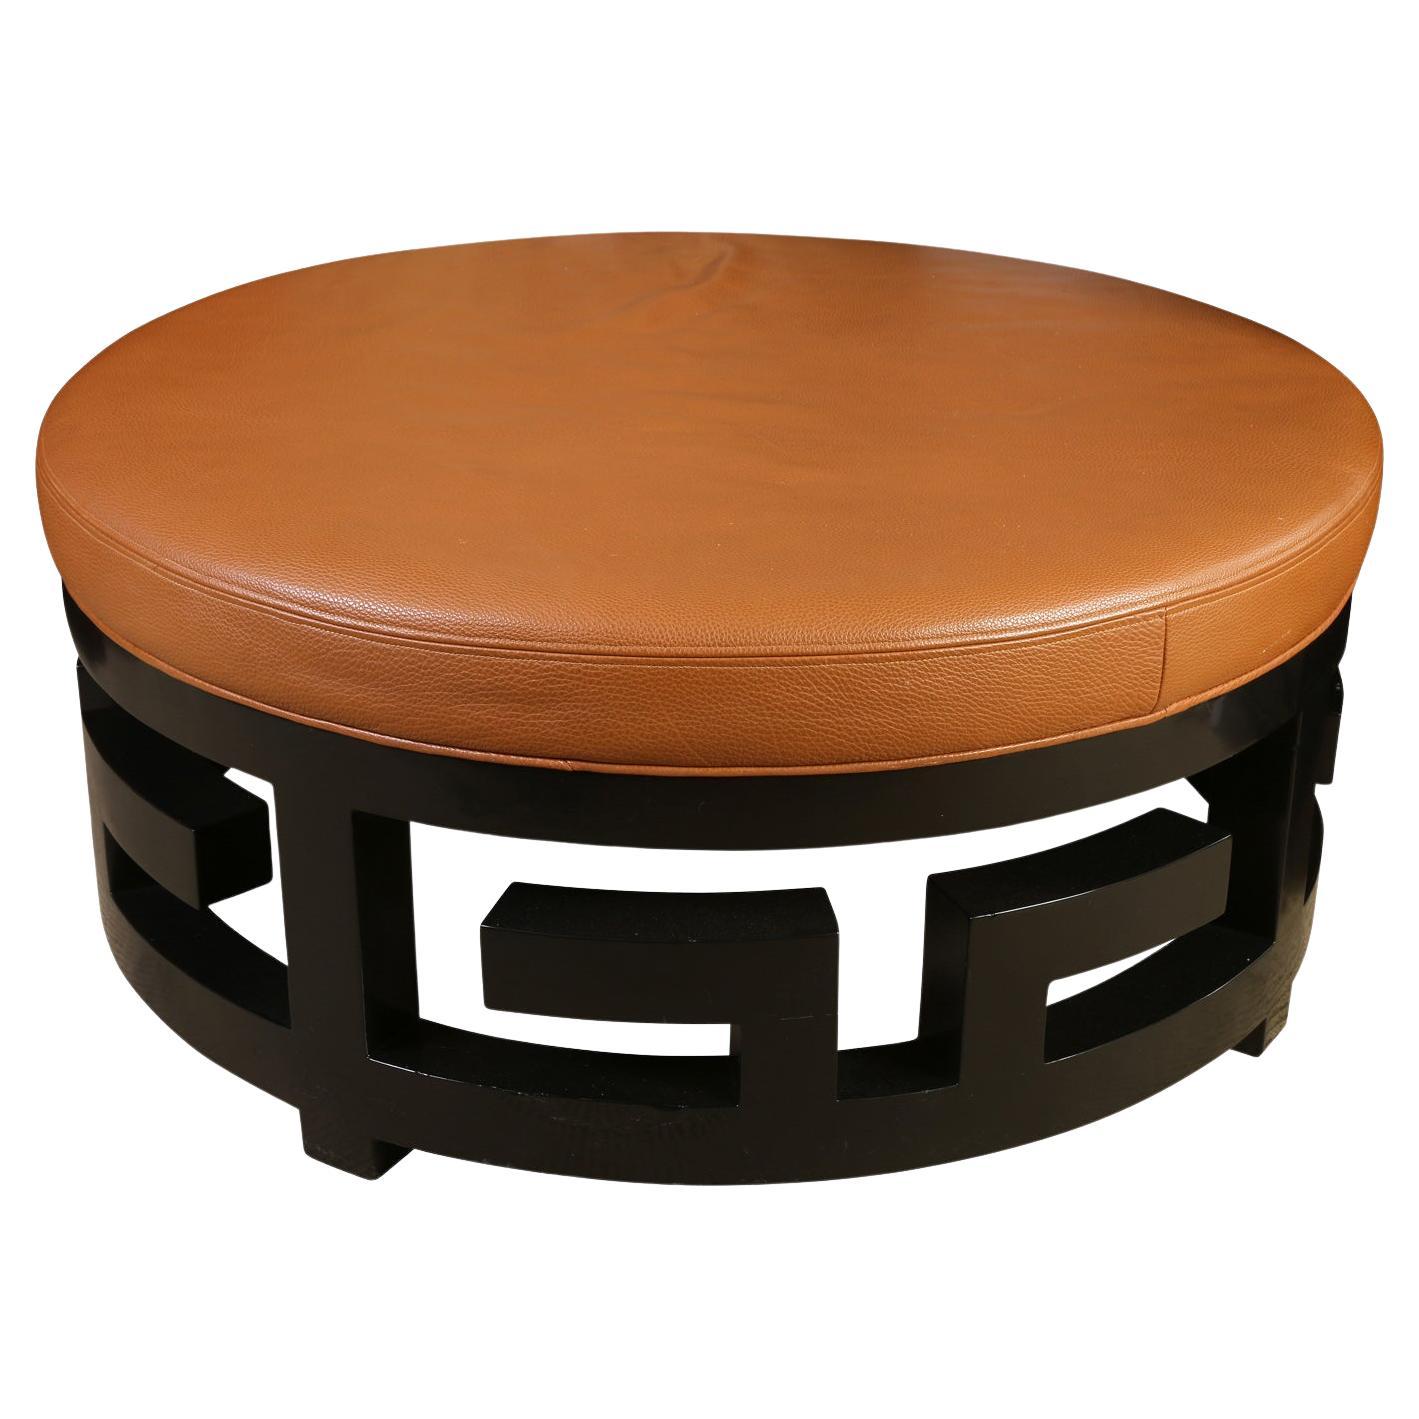 Round Pebbled Leather Ottoman with Black Fretwork Base